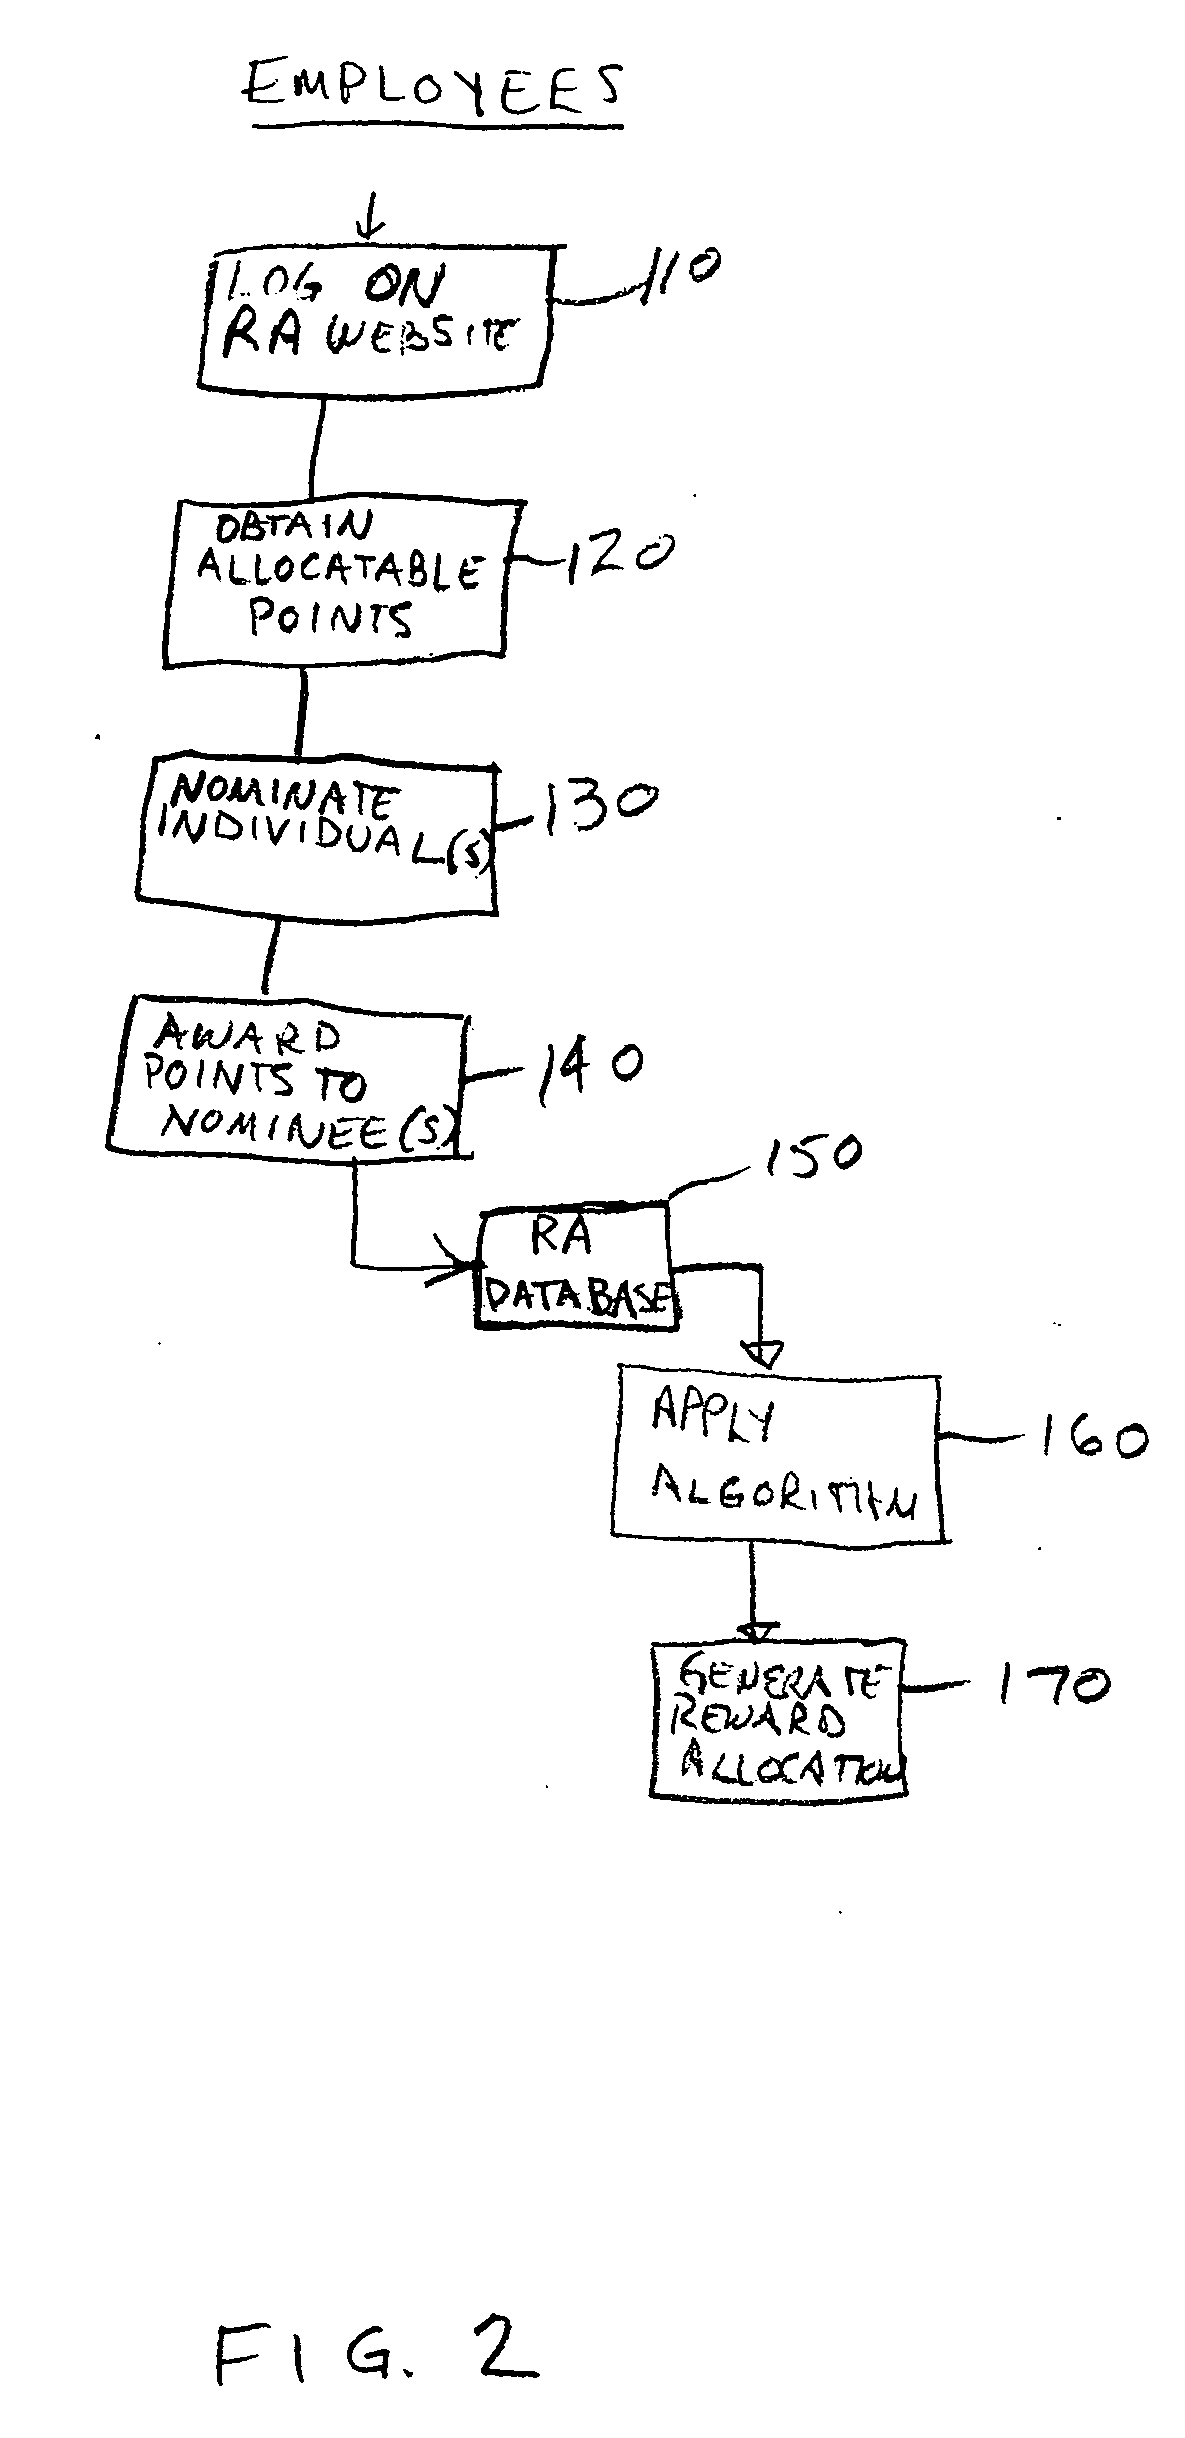 Methods and system for allocation of rewards and mapping activity within organizations